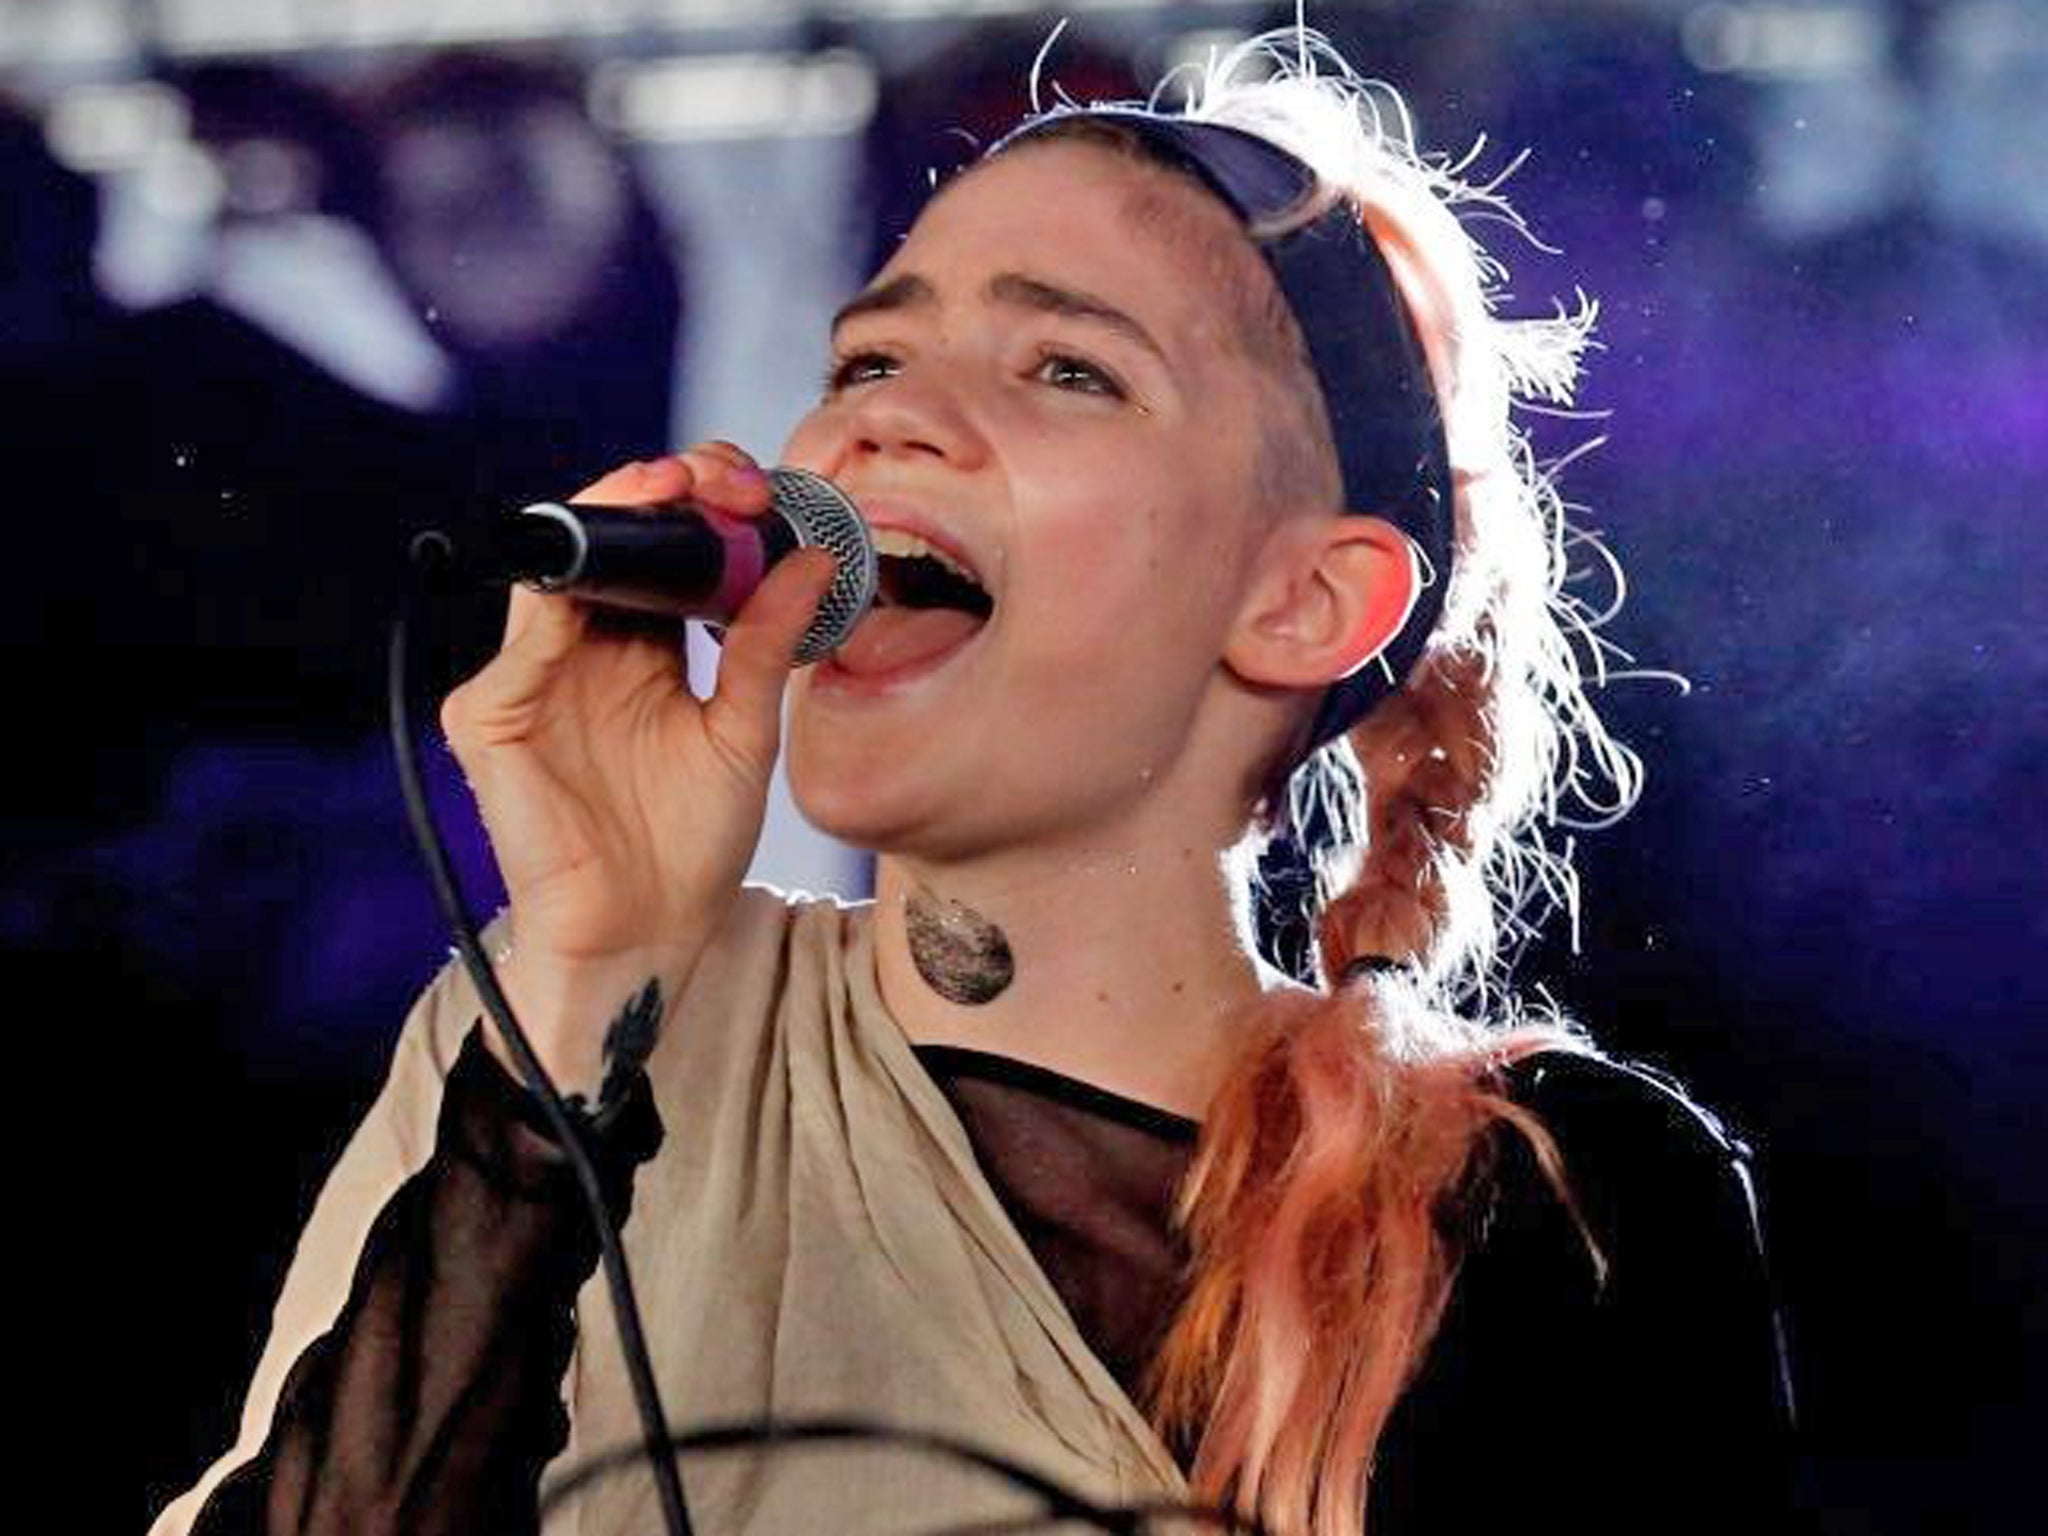 Art Angels, Grimes' fourth album, was released in November